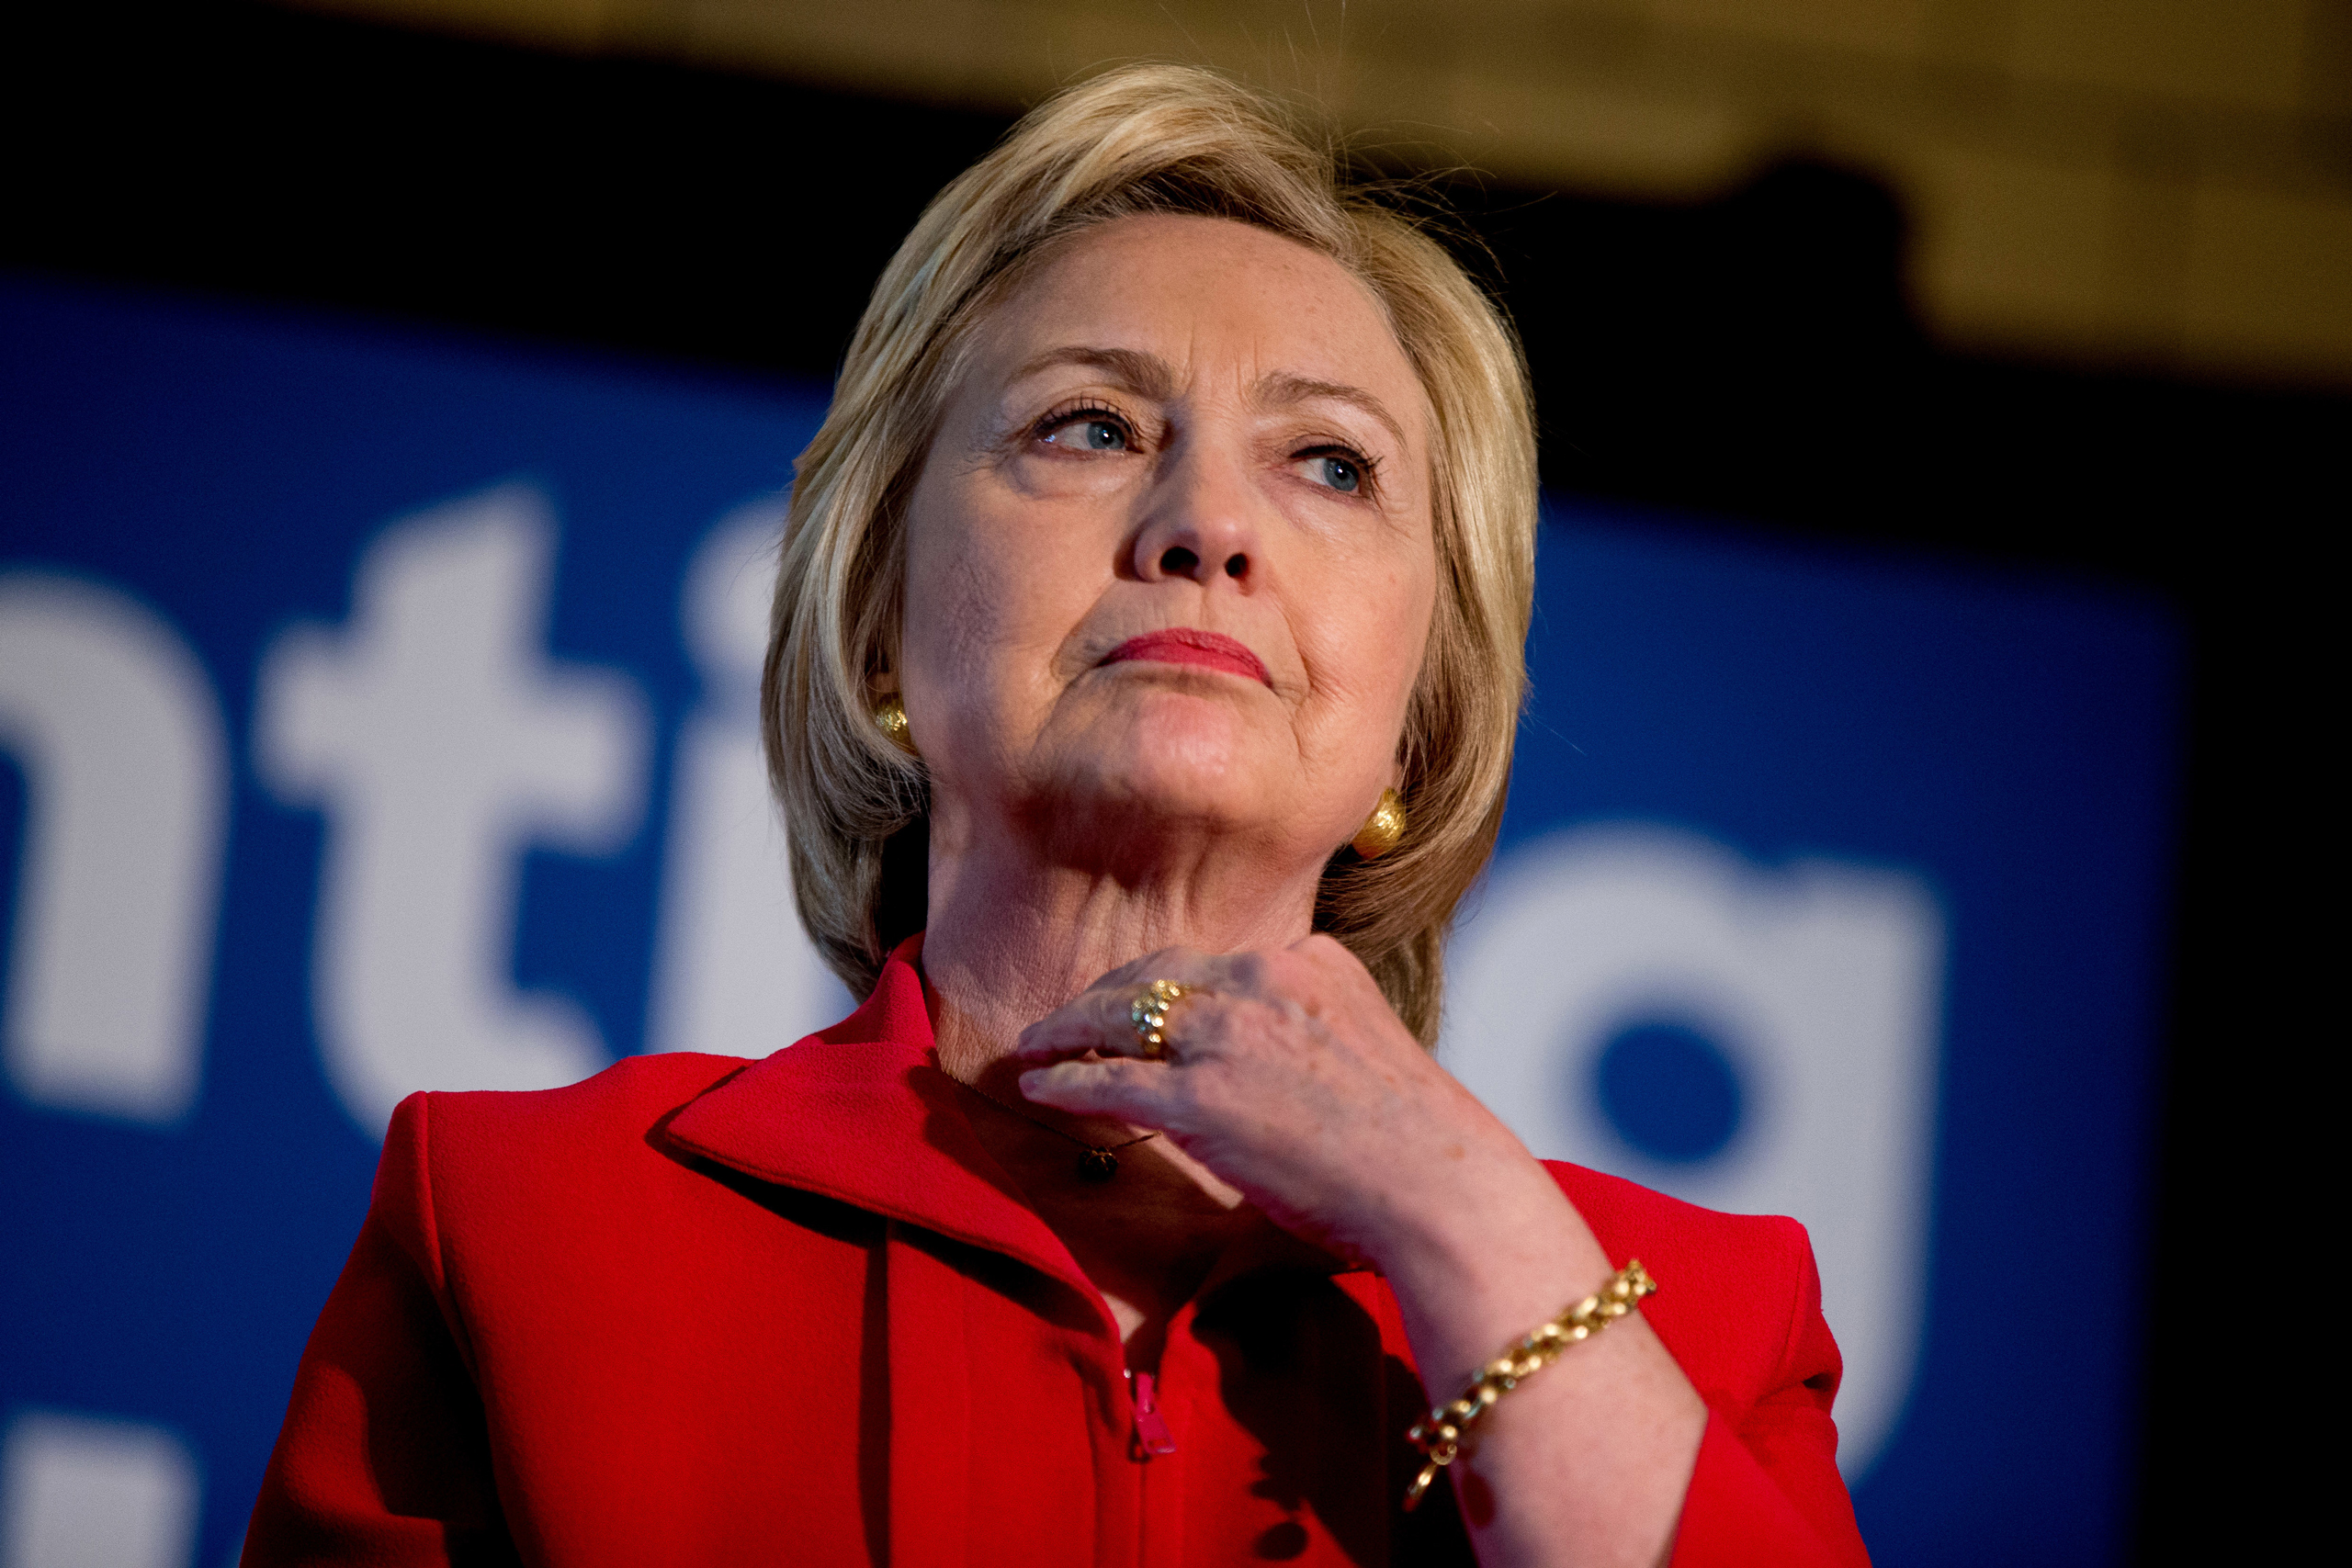 In this May 16, 2016 photo, Democratic presidential candidate Hillary Clinton waits to speak at a get out the vote event at La Gala in Bowling Green, Ky.  Hillary Clinton has a message for Donald Trump: Bring it on. As Clinton's path to the Democratic nomination seems all-but-assured, friends, aides and supporters describe a candidate who is not only prepared to tune out Trump's increasingly direct attacks on her husband's personal indiscretions but believes they will eventually benefit her presidential aspirations.  (AP Photo/Andrew Harnik)